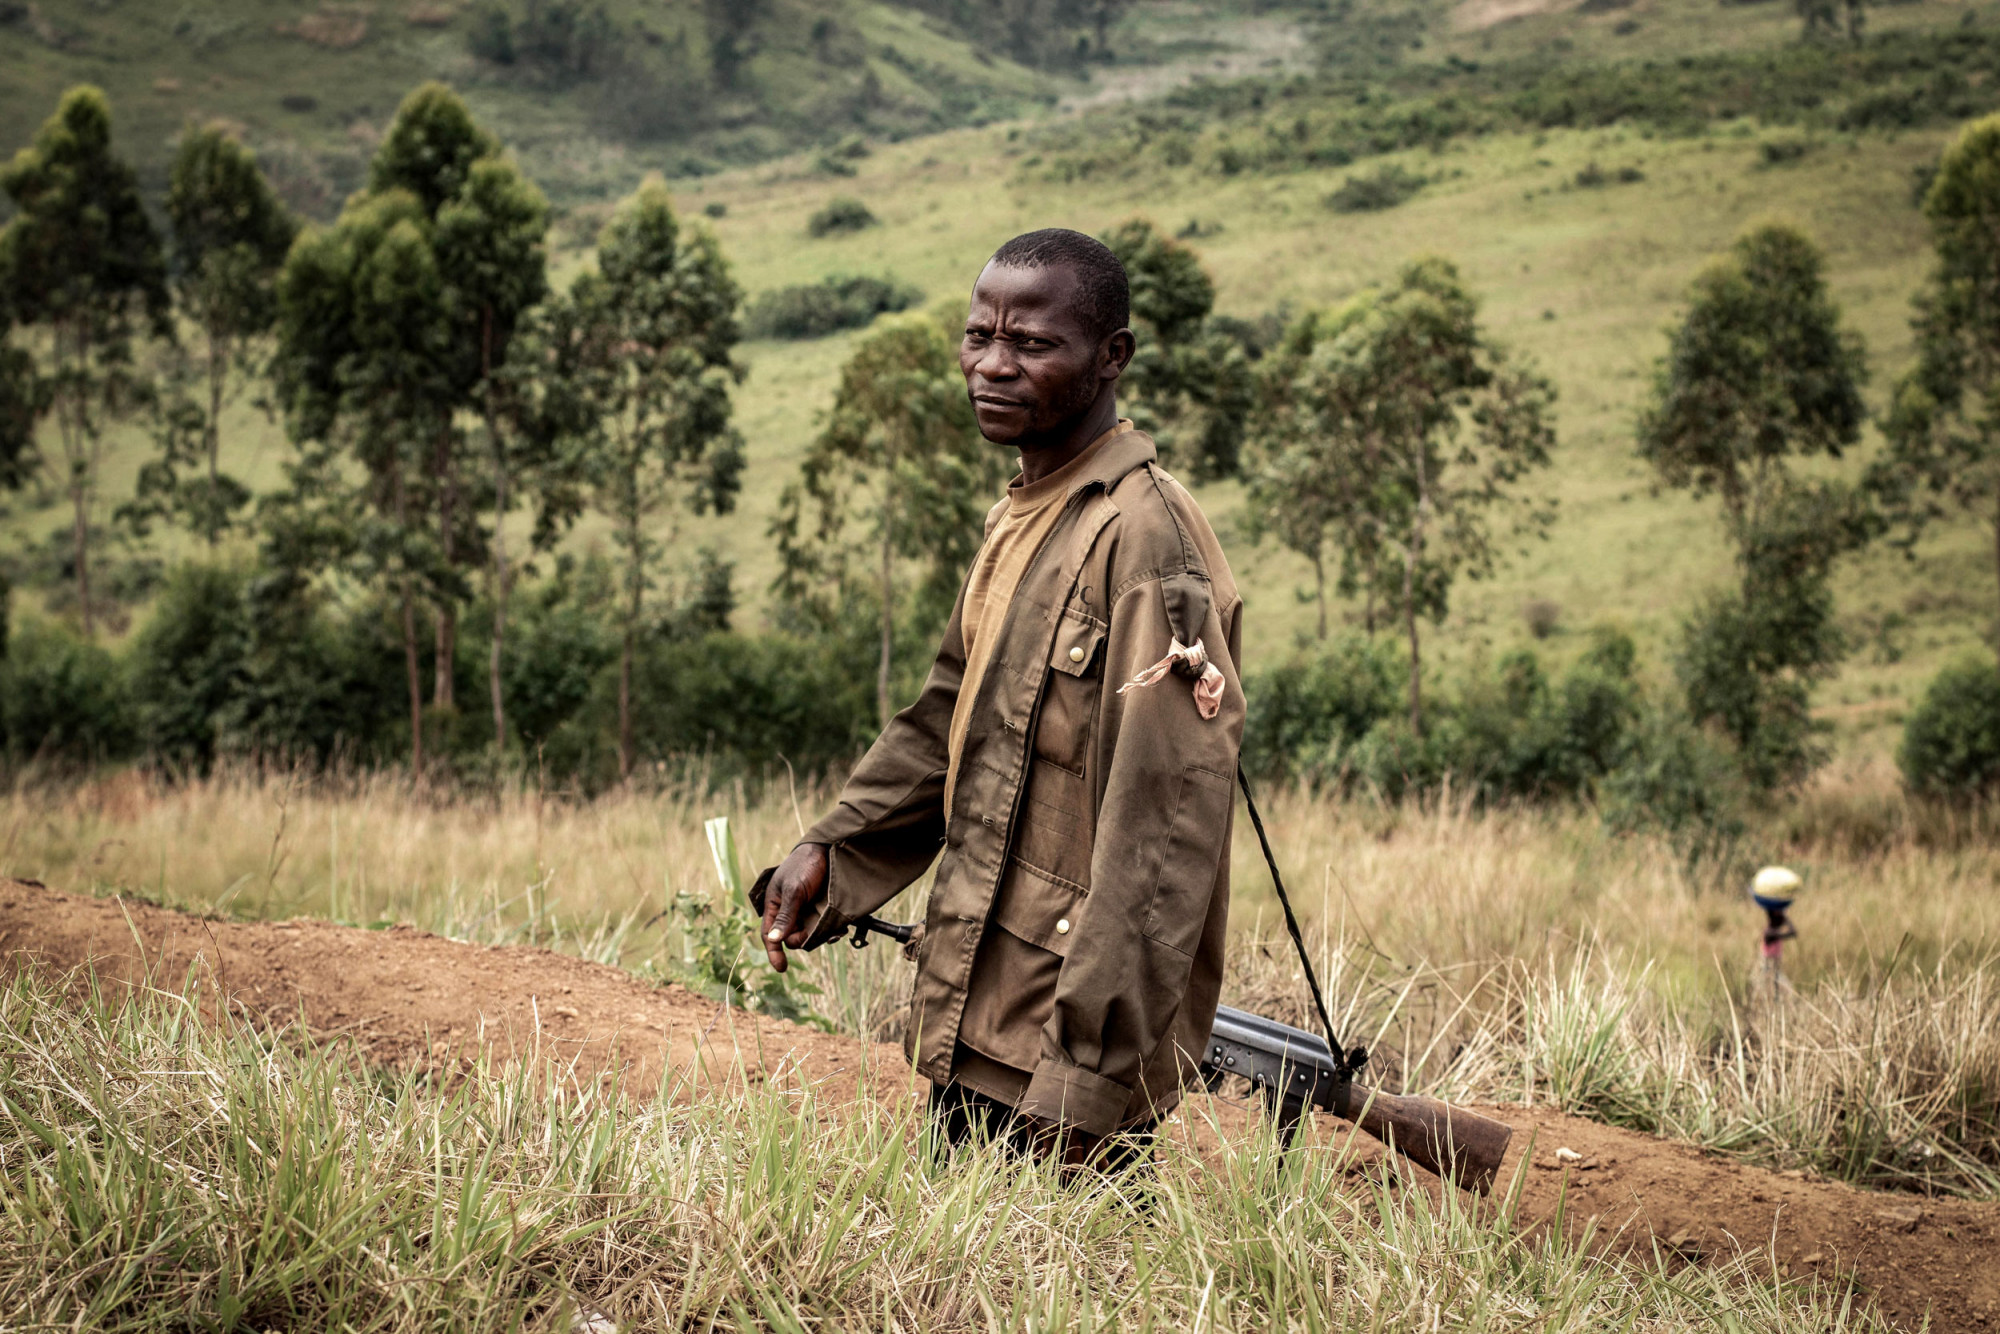 Tche, DRC, February 2020. A Congolese government soldier in the village of Tche in Ituri province in February. A series of massacres in villages in Djugu territory, including Tche, killed 161 people in early June 2019 and killings in the area have continued in 2020. Congolese security forces fighting local militias have also committed serious abuses, including extrajudicial executions, according to Human Rights Watch.© Dieudonne Dirole for Fondation Carmignac